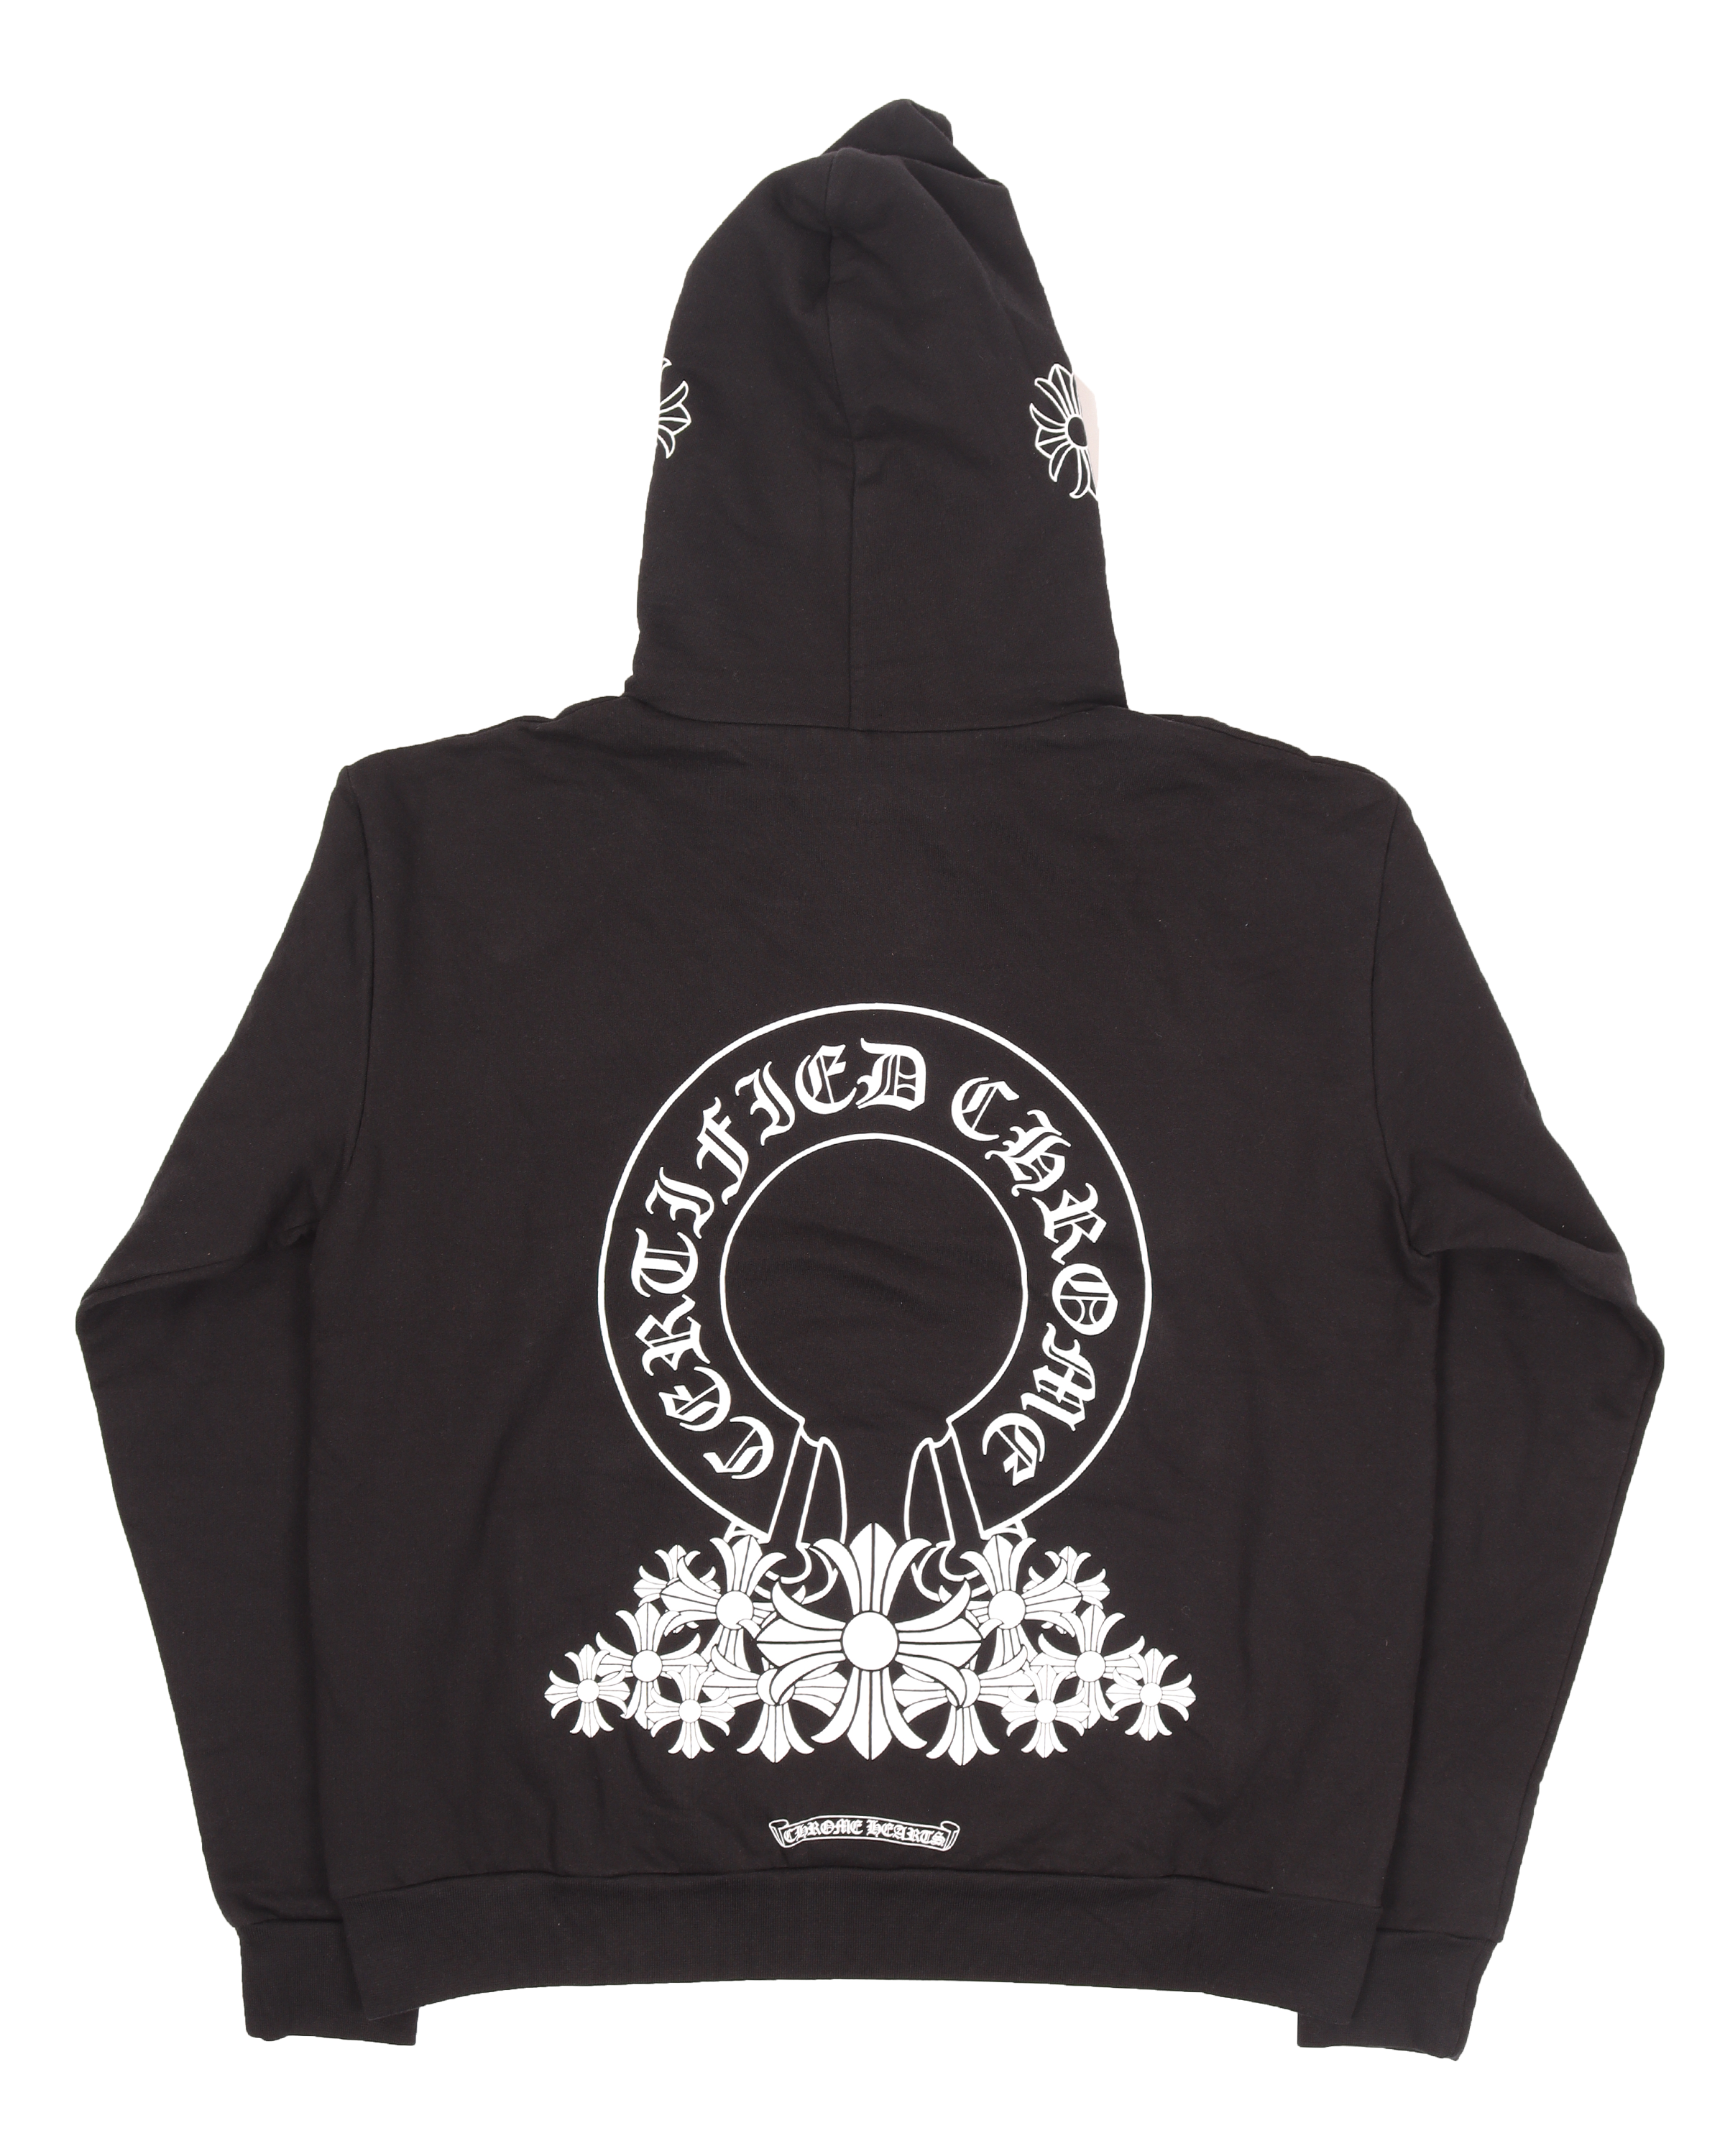 Drake "Certified Chrome" Lover Boy Hoodie (Miami Exclusive)